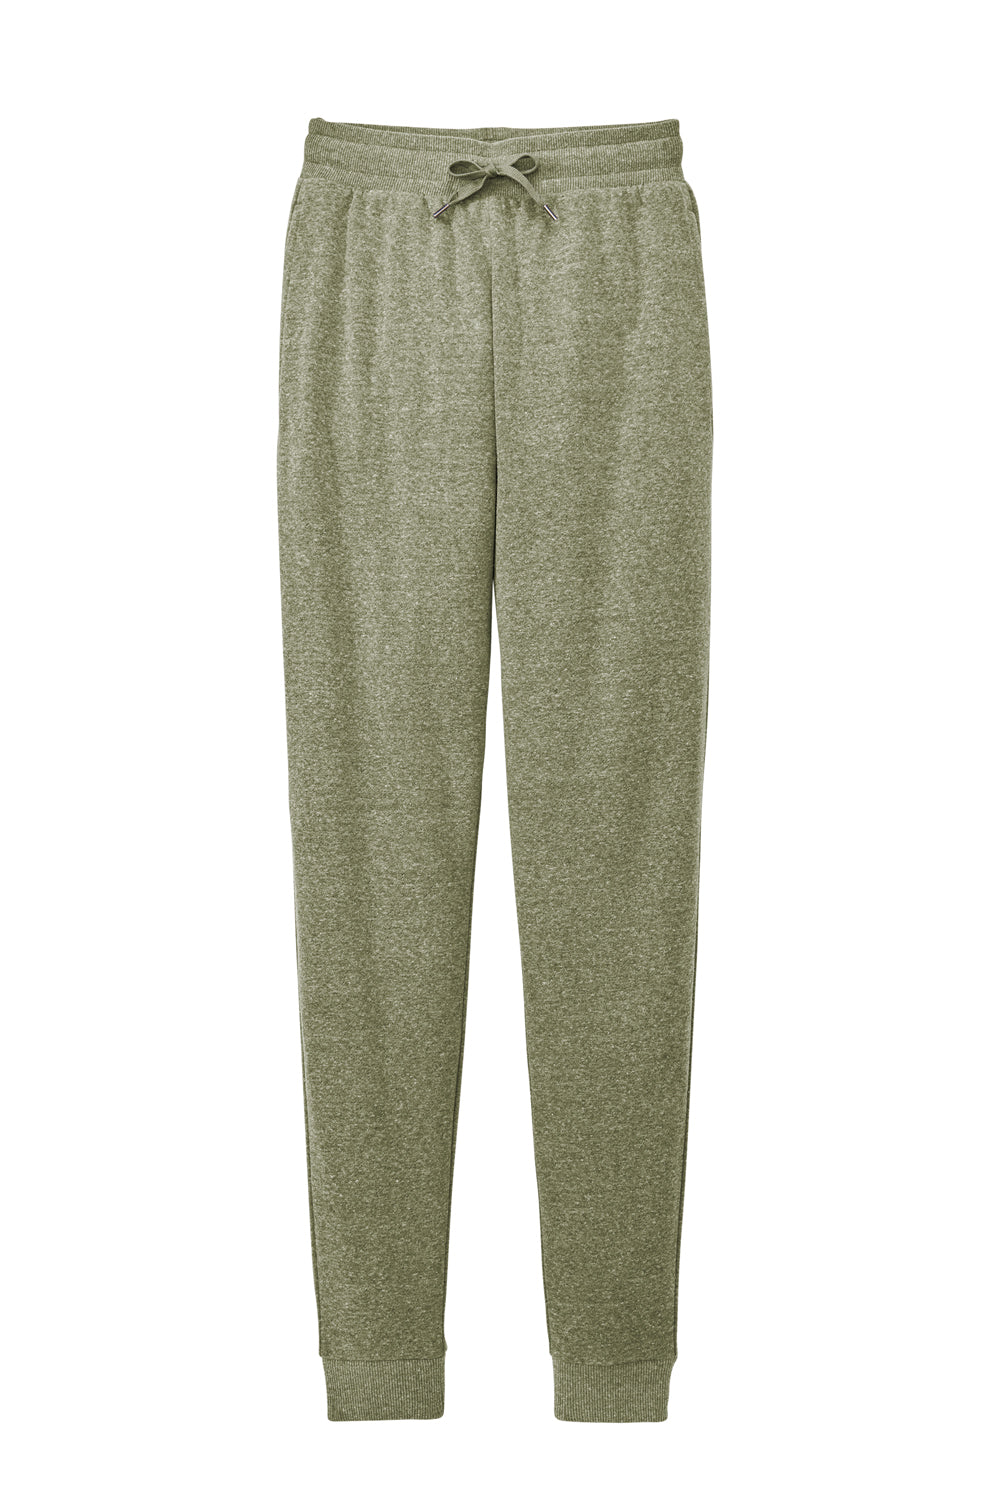 District DT1307 Mens Perfect Tri Fleece Jogger Sweatpants w/ Pockets Military Green Frost Flat Front